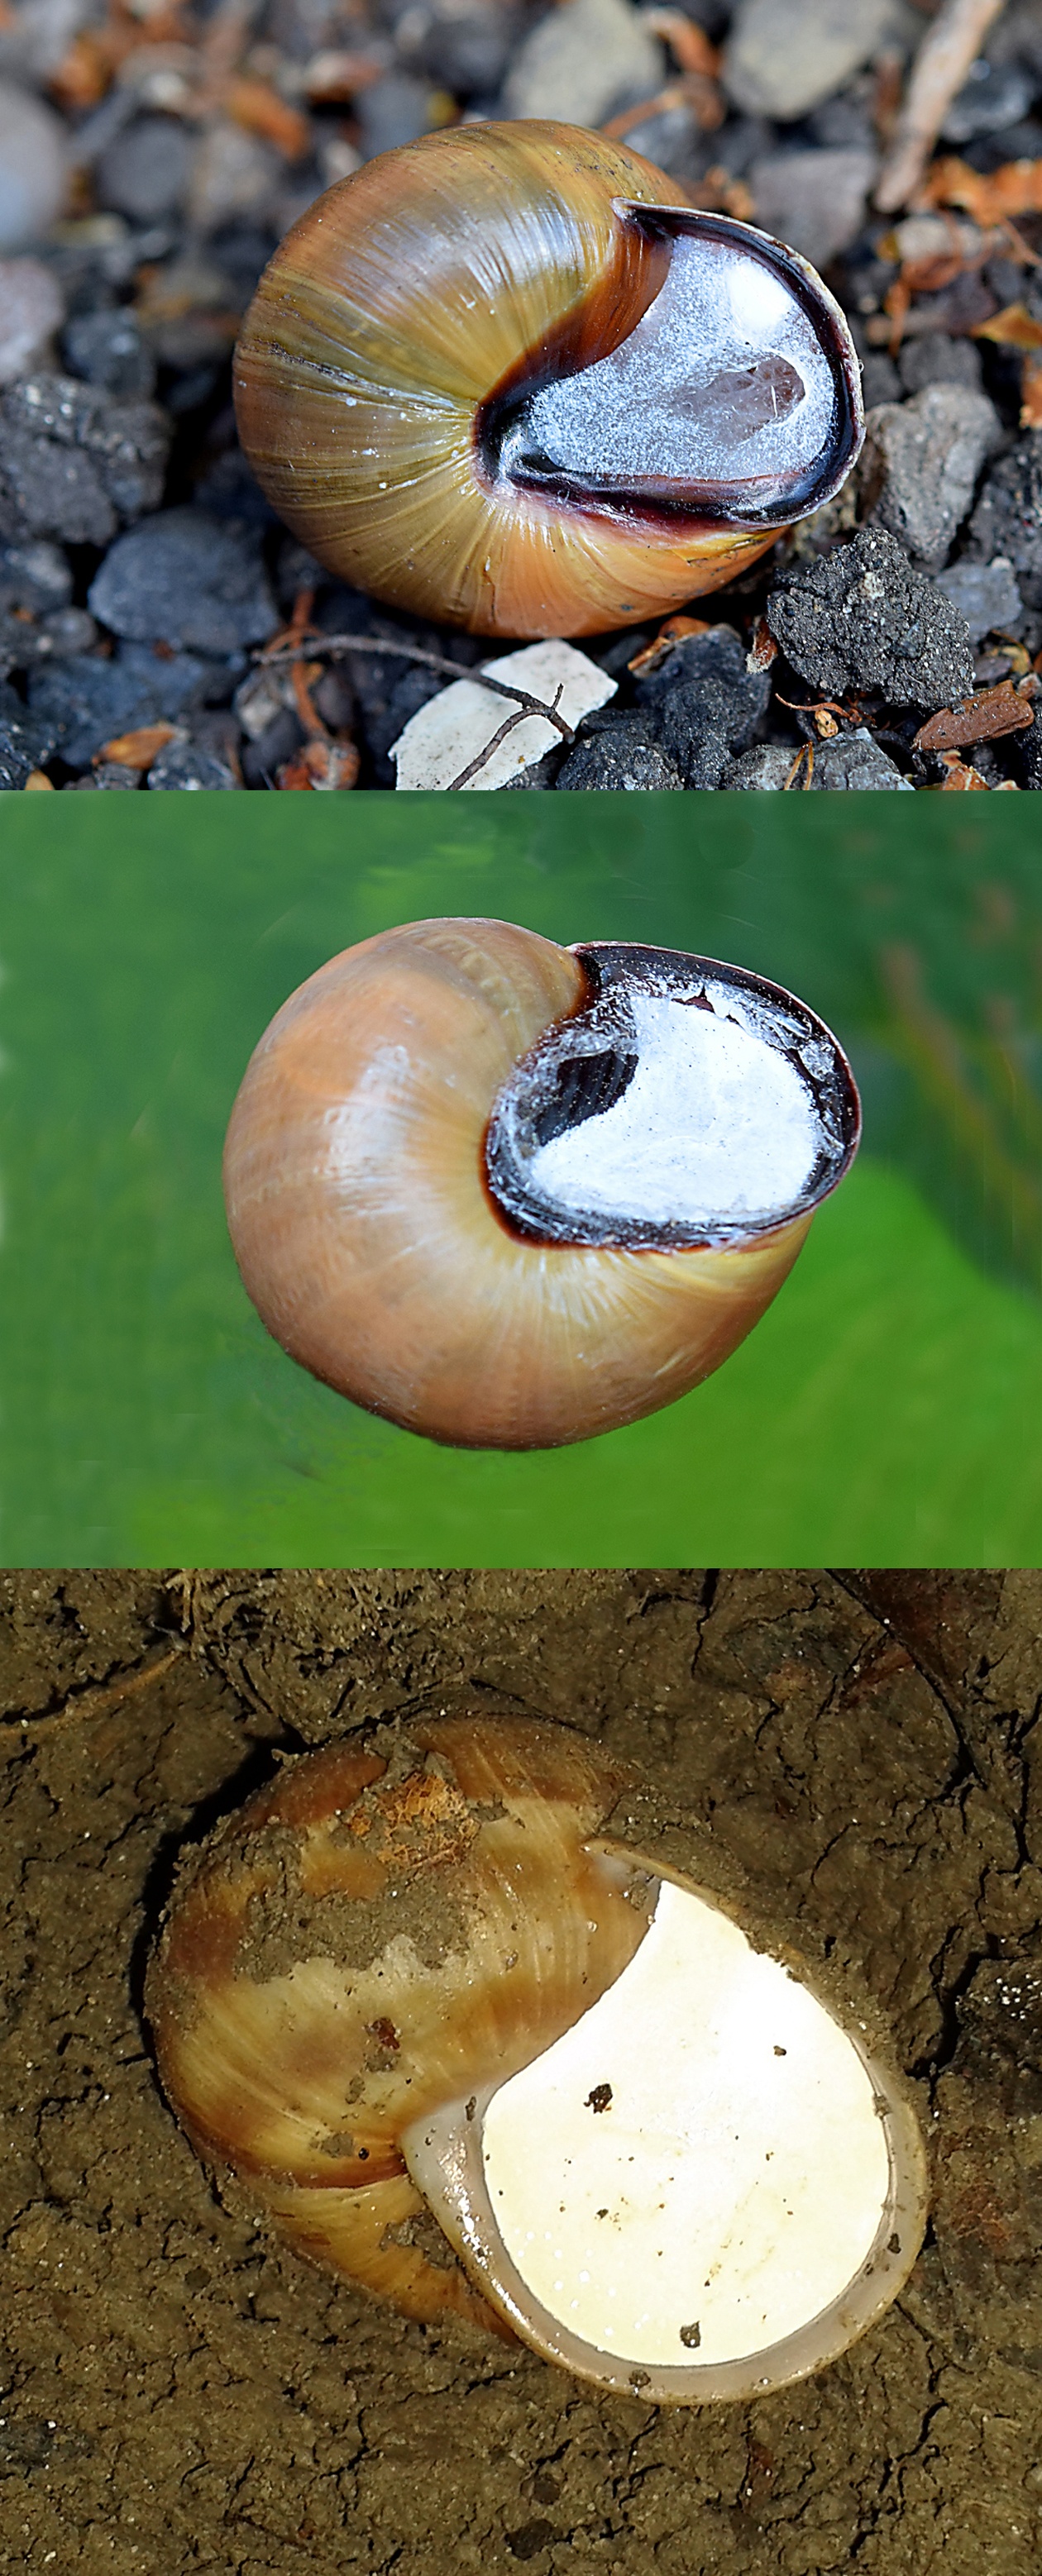 What temperature do snails thrive in?